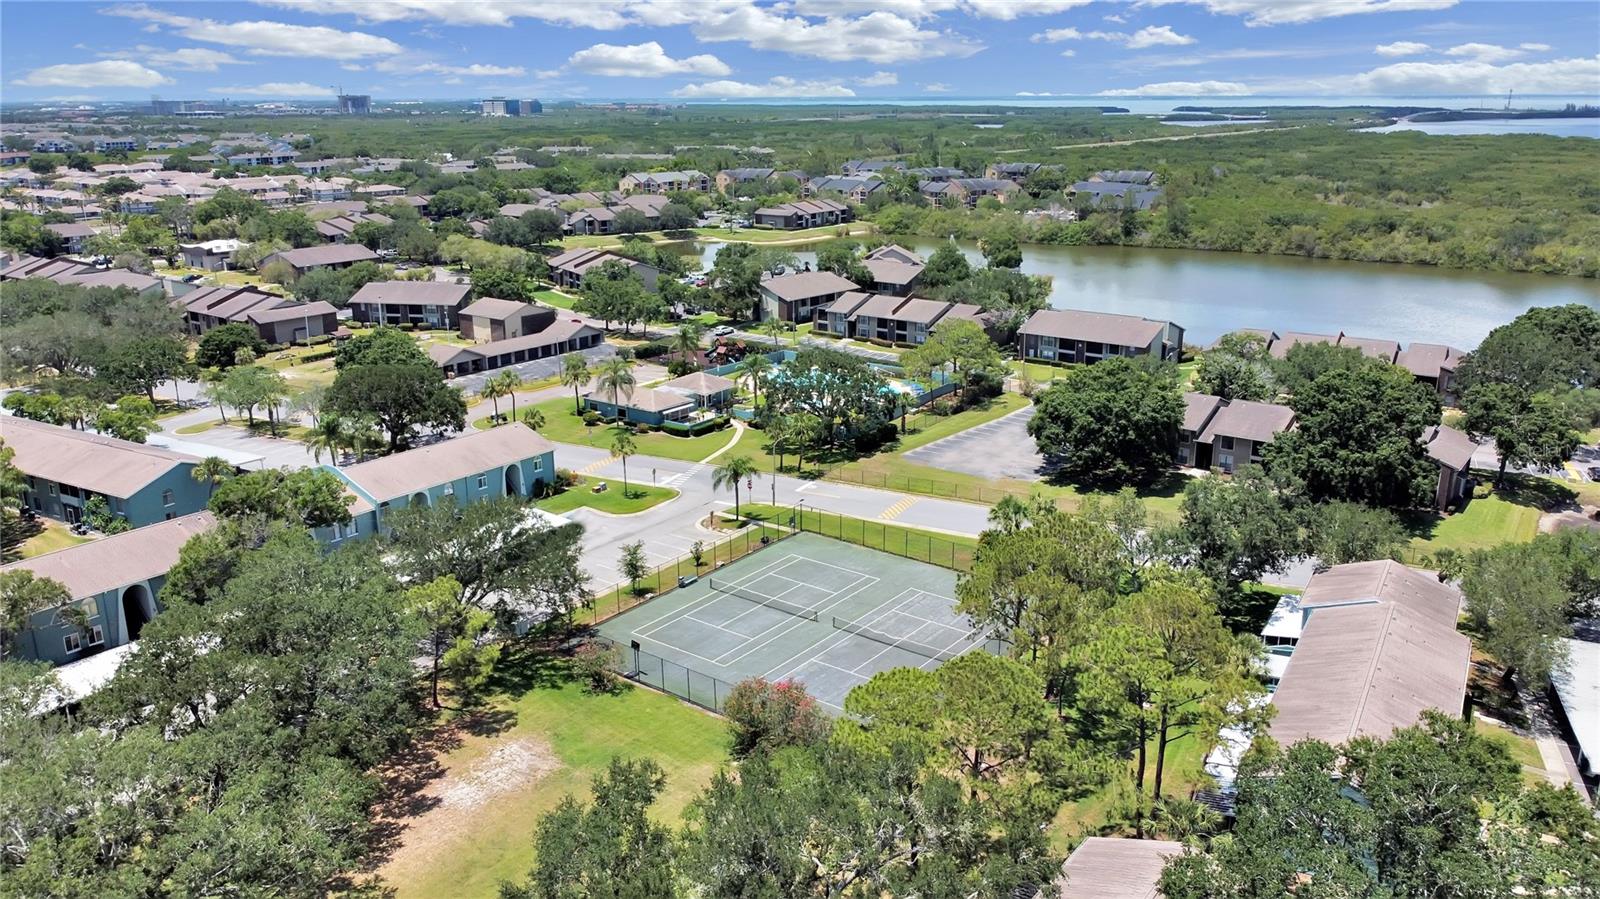 Amenities such as a clubhouse, on-site property management, huge resort-styled pool, tennis courts, soccer field, car wash station (with vacuum), a playground and plenty of guest parking.